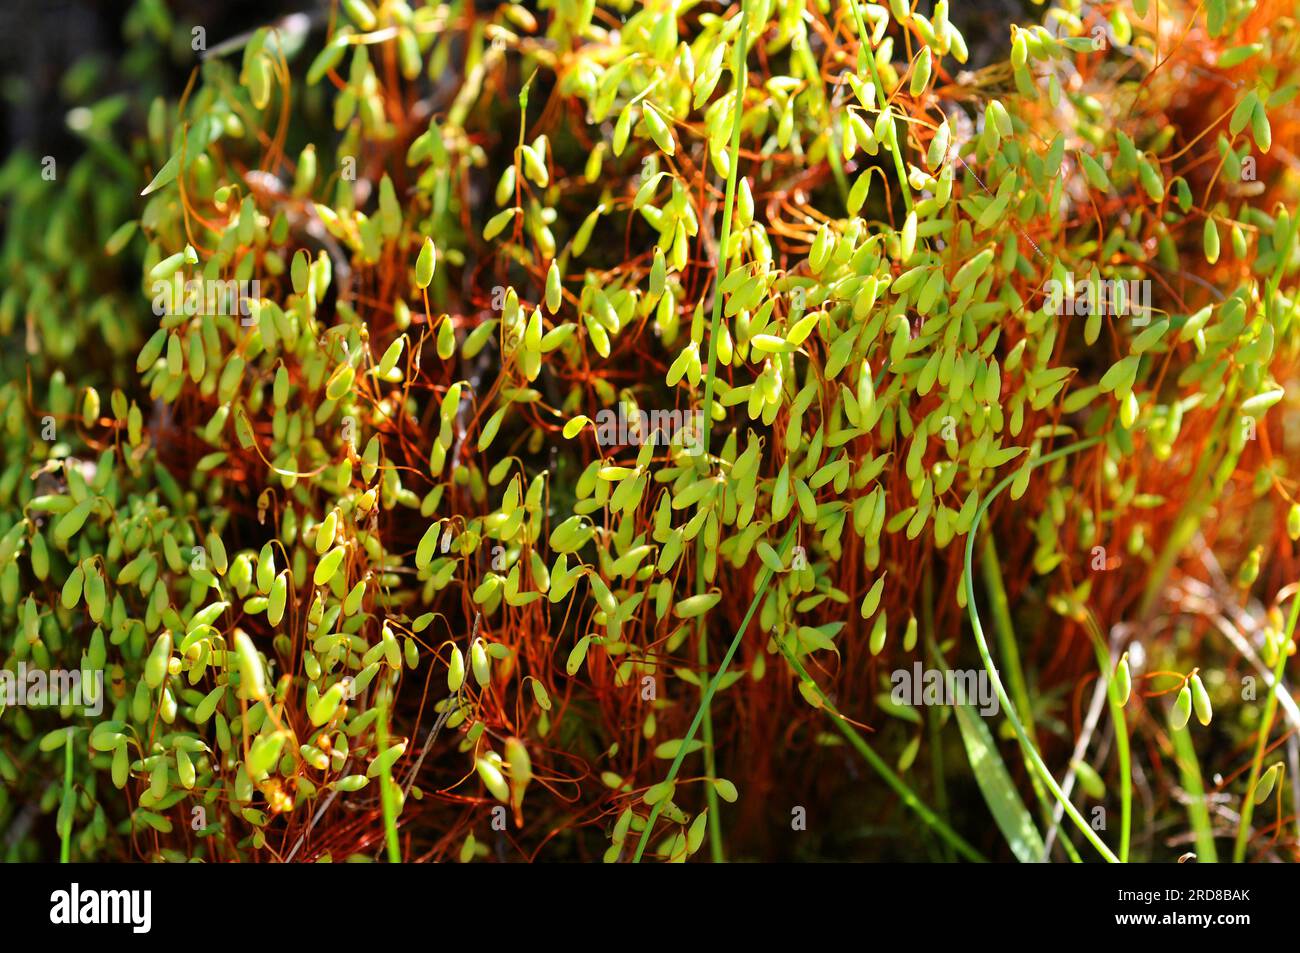 Pohlia cruda is a moss with glaucous green leaves, red stems and elliptically capsules.   Bryopsida. Bryales. Mniaceae. This photo was taken near Bany Stock Photo